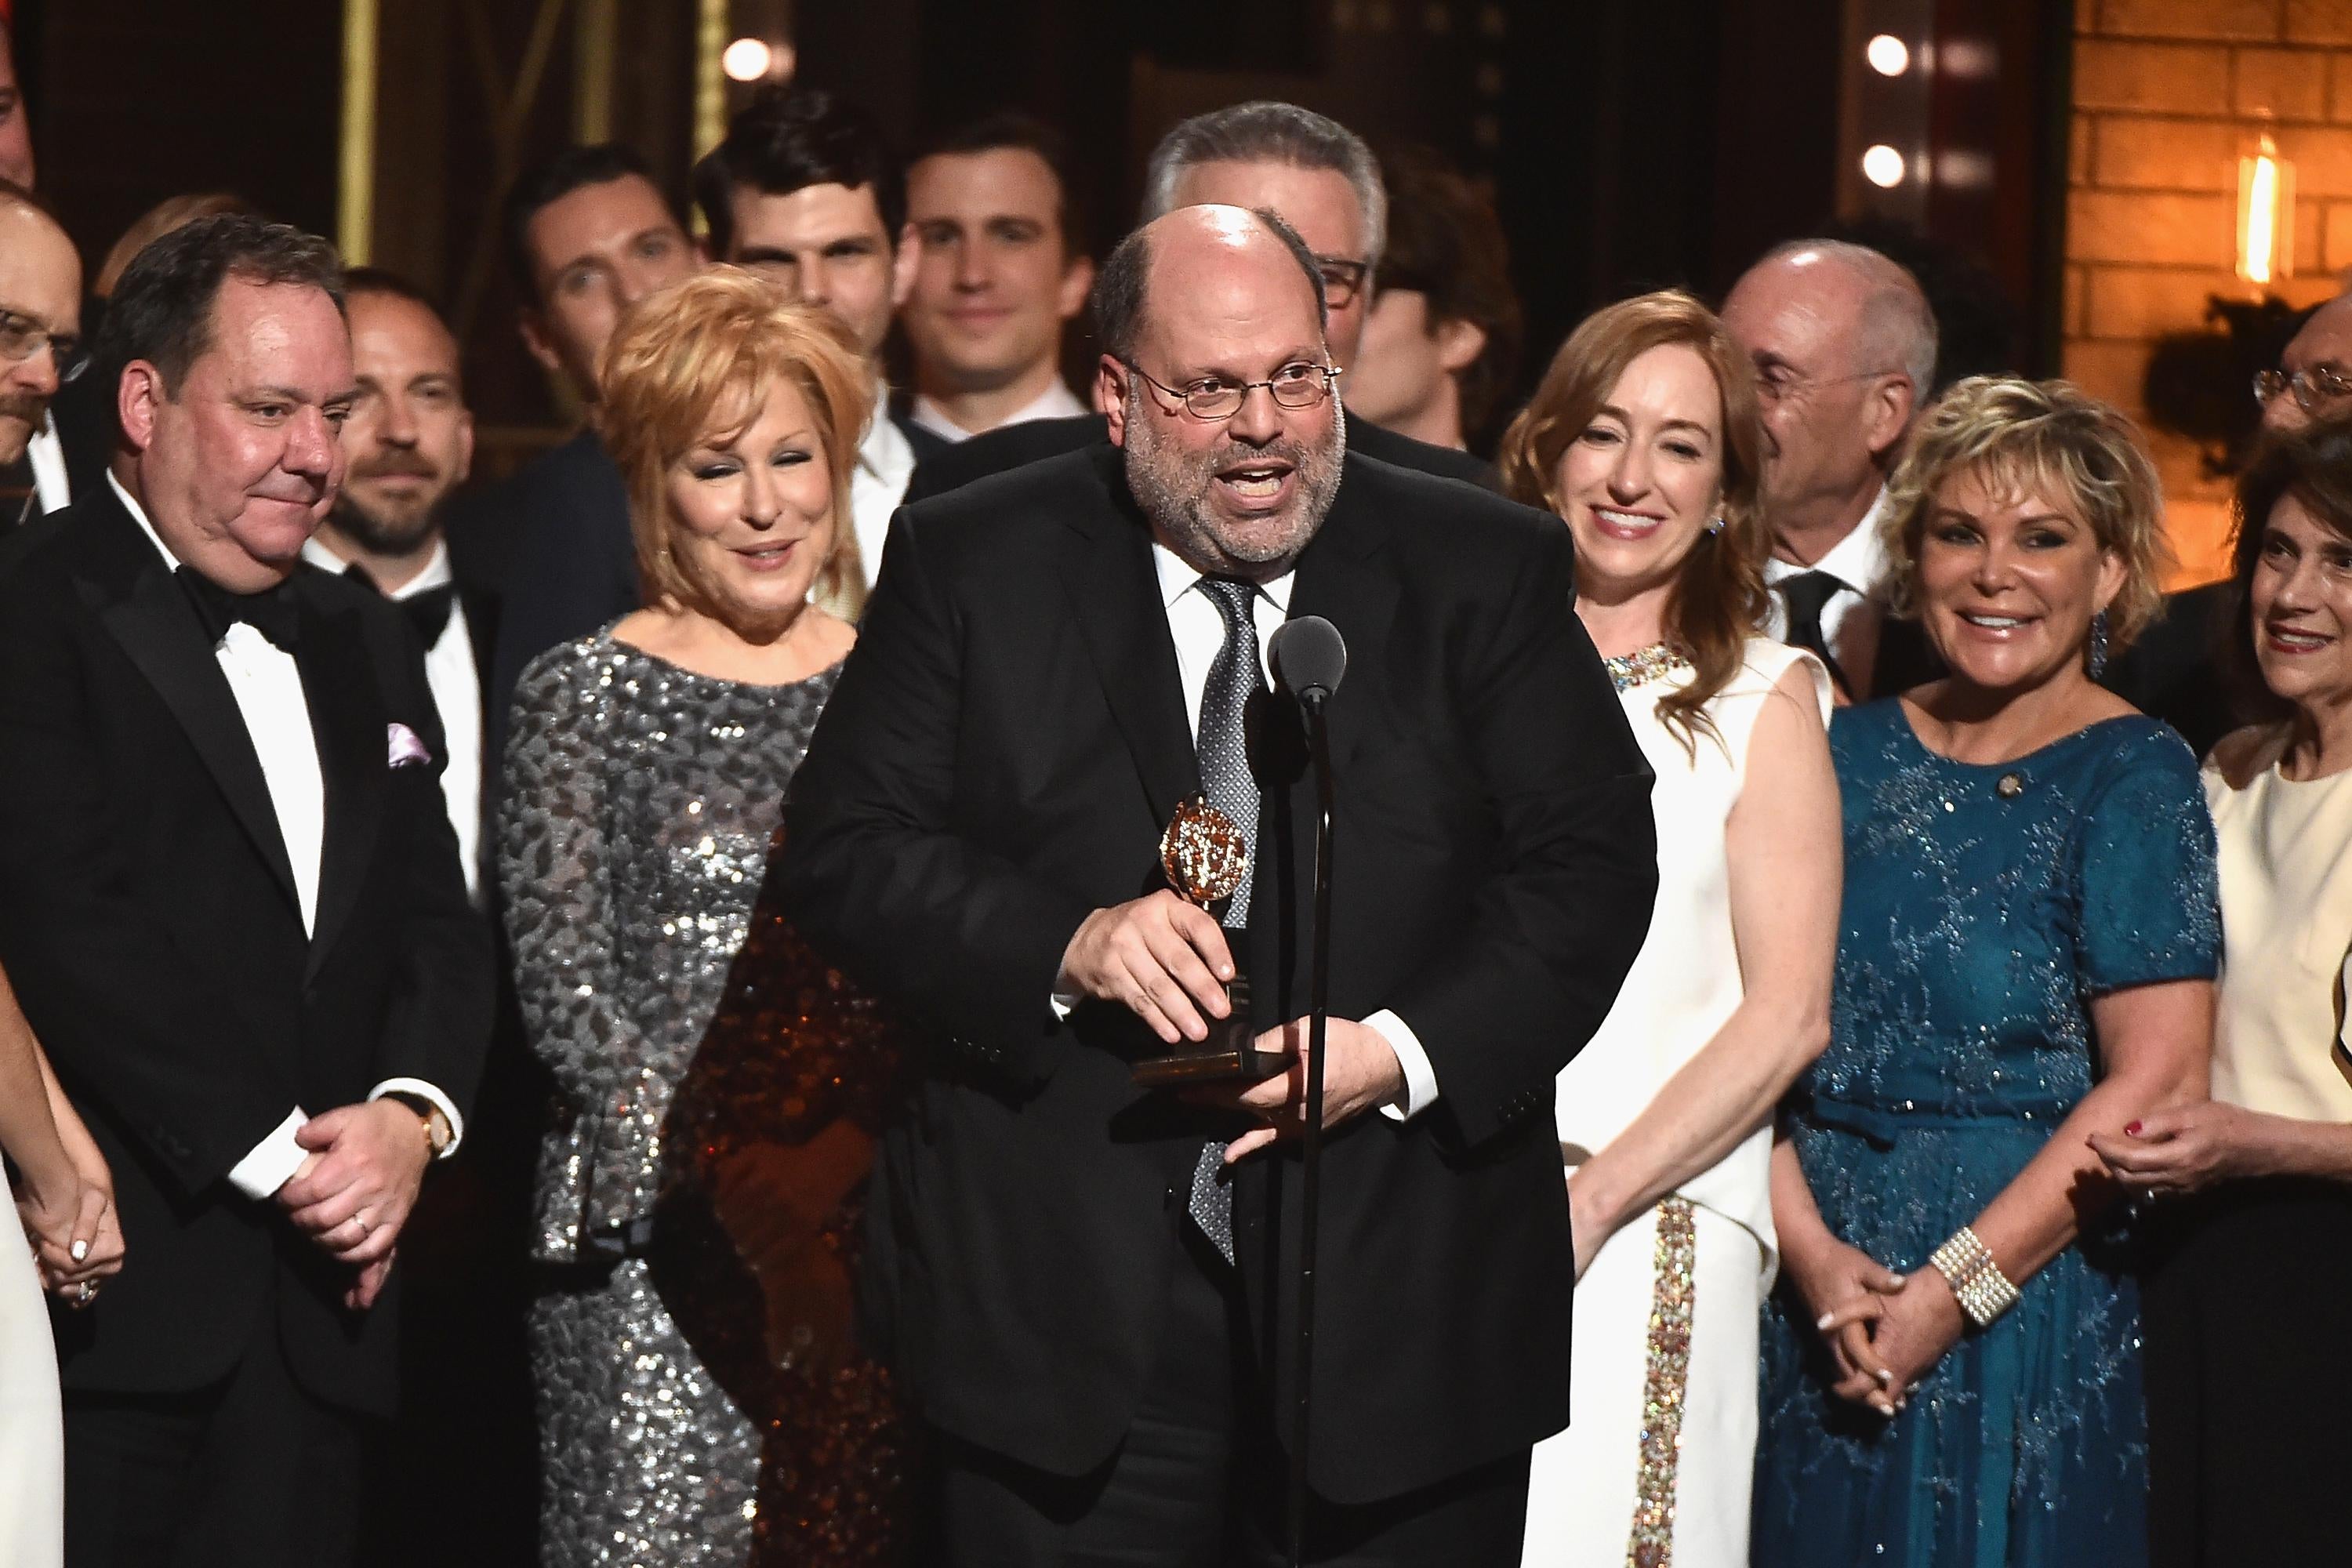 Scott Rudin, in a tuxedo, stands on stage holding a Tony, surrounded by the cast of Hello Dolly!